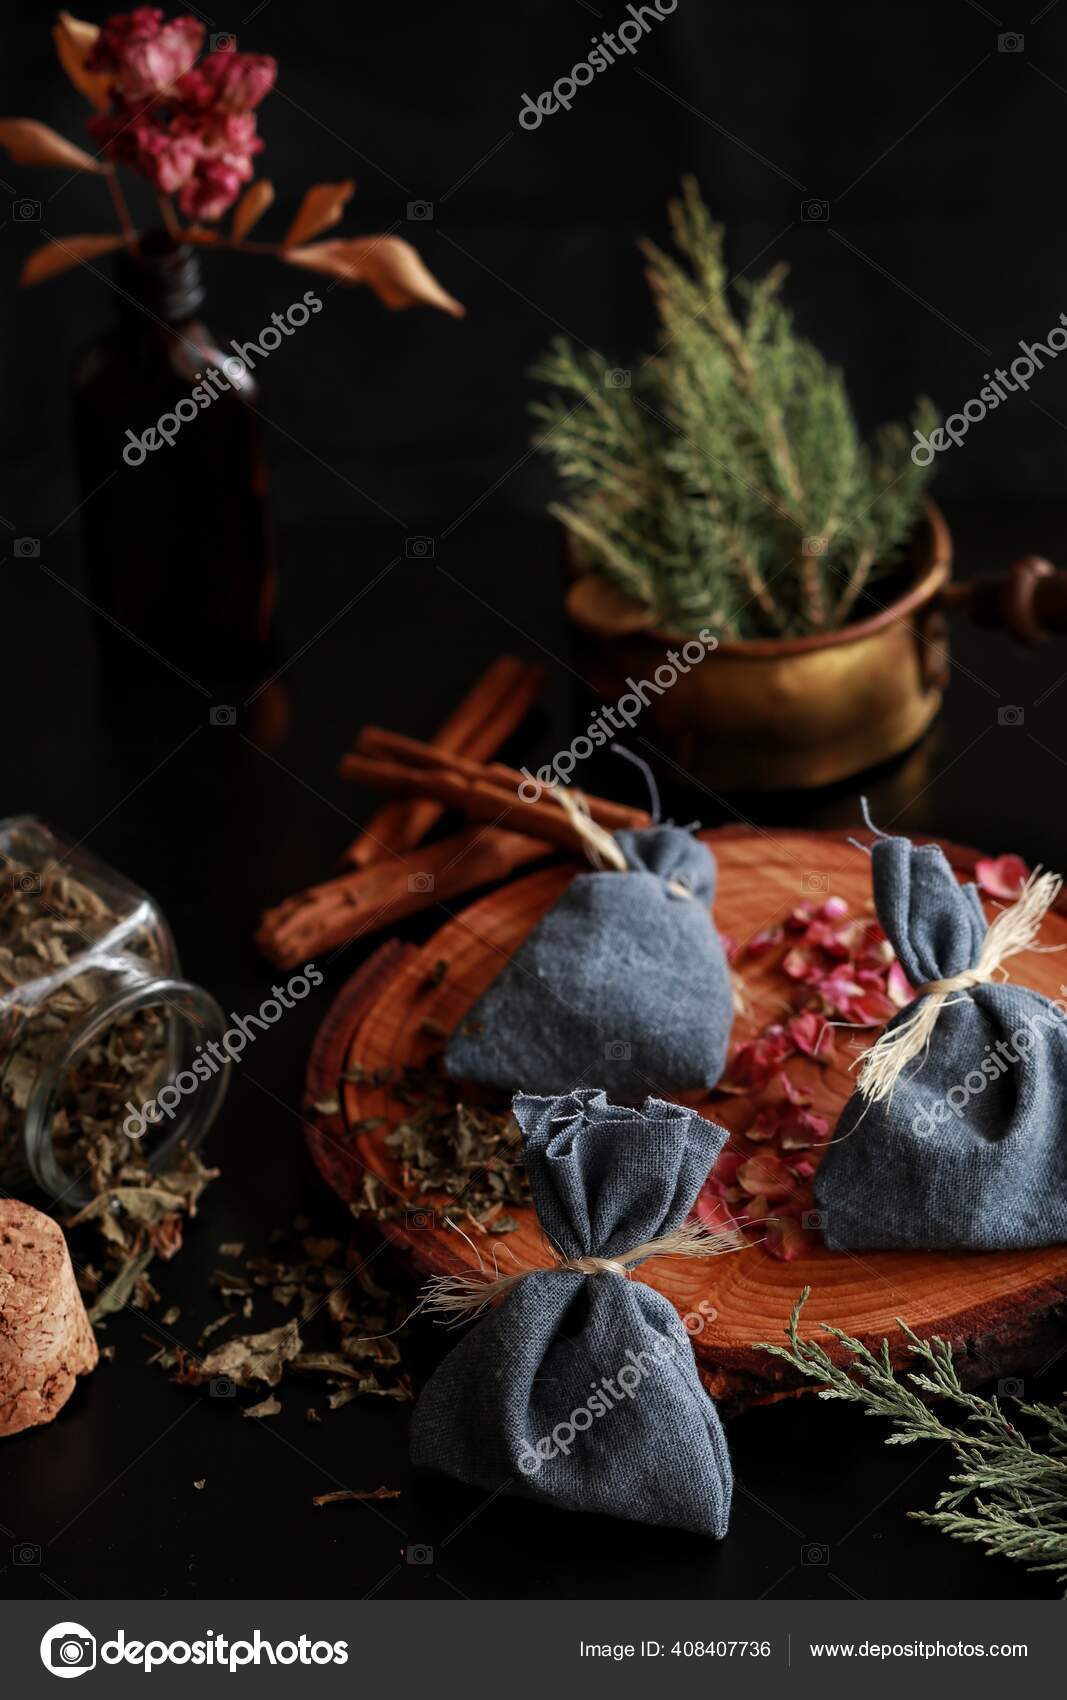 Flat lay of kitchen witchery using herbs and spices found at home. Herbal  magick in wicca and witchcraft. Glass jars filled with dried herbs and  spices, cinnamon, flowers, camomile, burning candles Stock